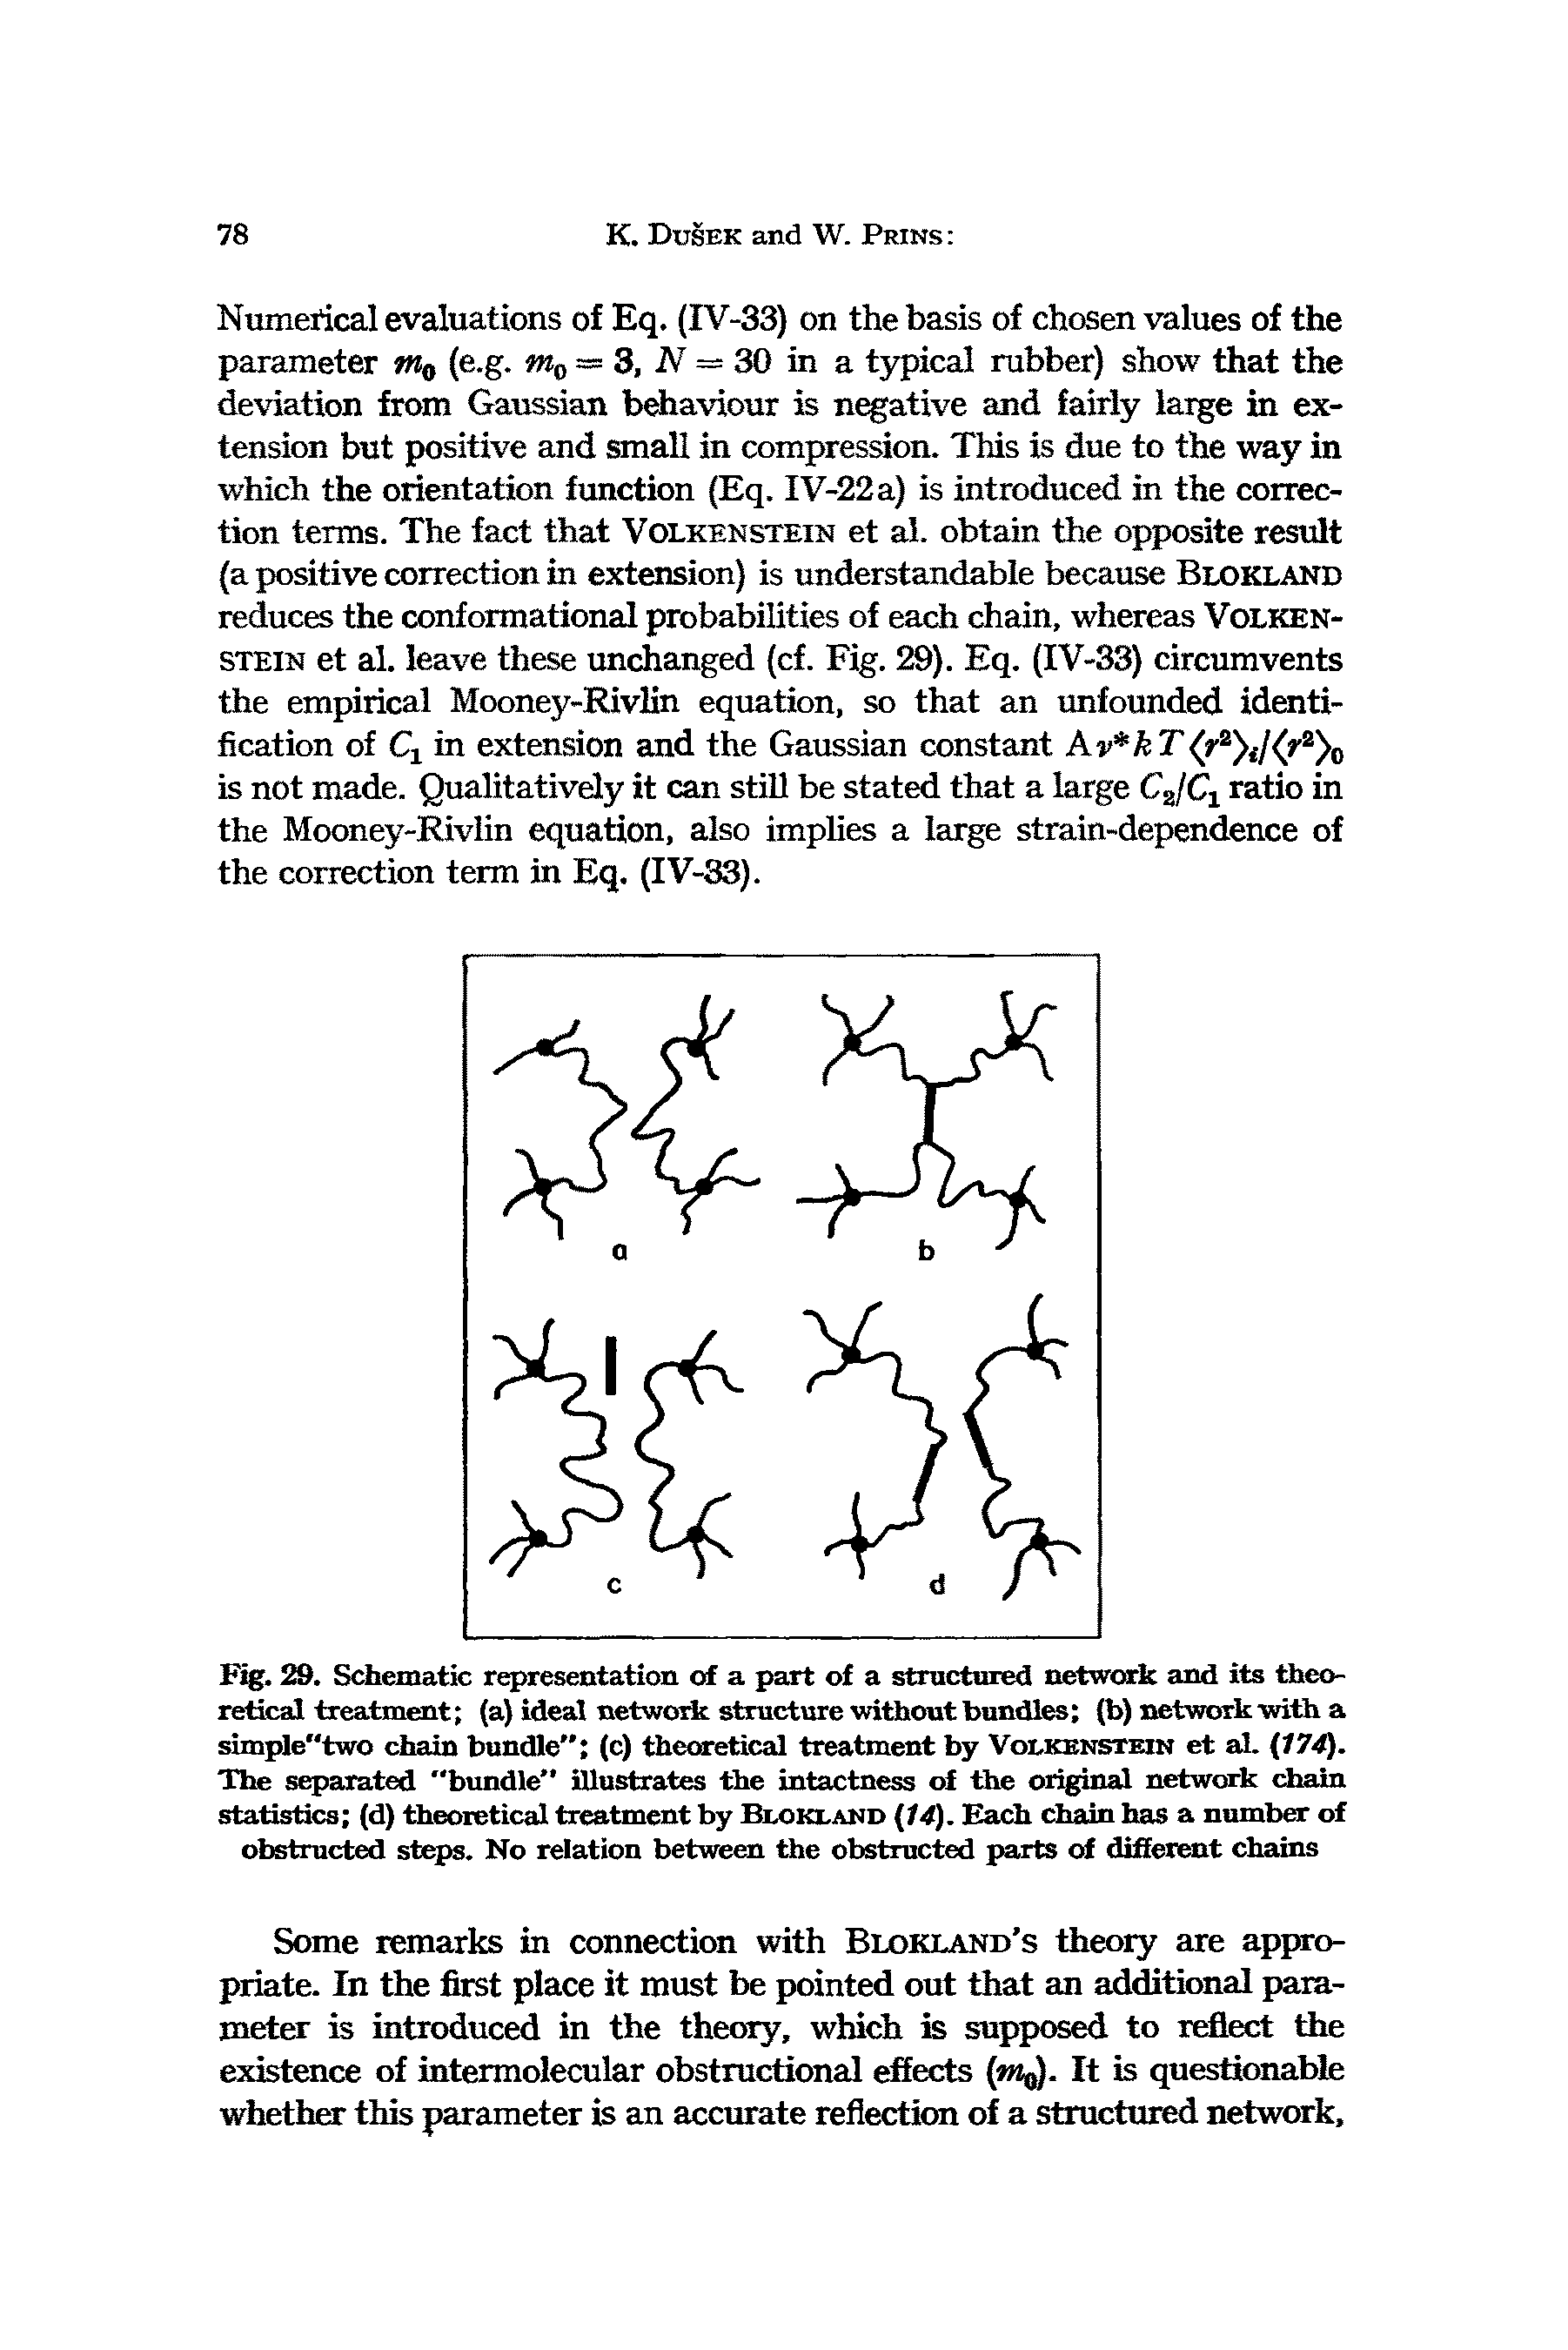 Fig. 29. Schematic representation of a part of a structured network and its theoretical treatment (a) ideal network structure without bundles (b) network with a simple"two chain bundle" (c) theoretical treatment by Volkenstein et al. (174). The separated "bundle illustrates the intactness of the original network chain statistics (d) theoretical treatment by Blokland (14). Each chain has a number of obstructed steps. No relation between the obstructed parts of different chains...